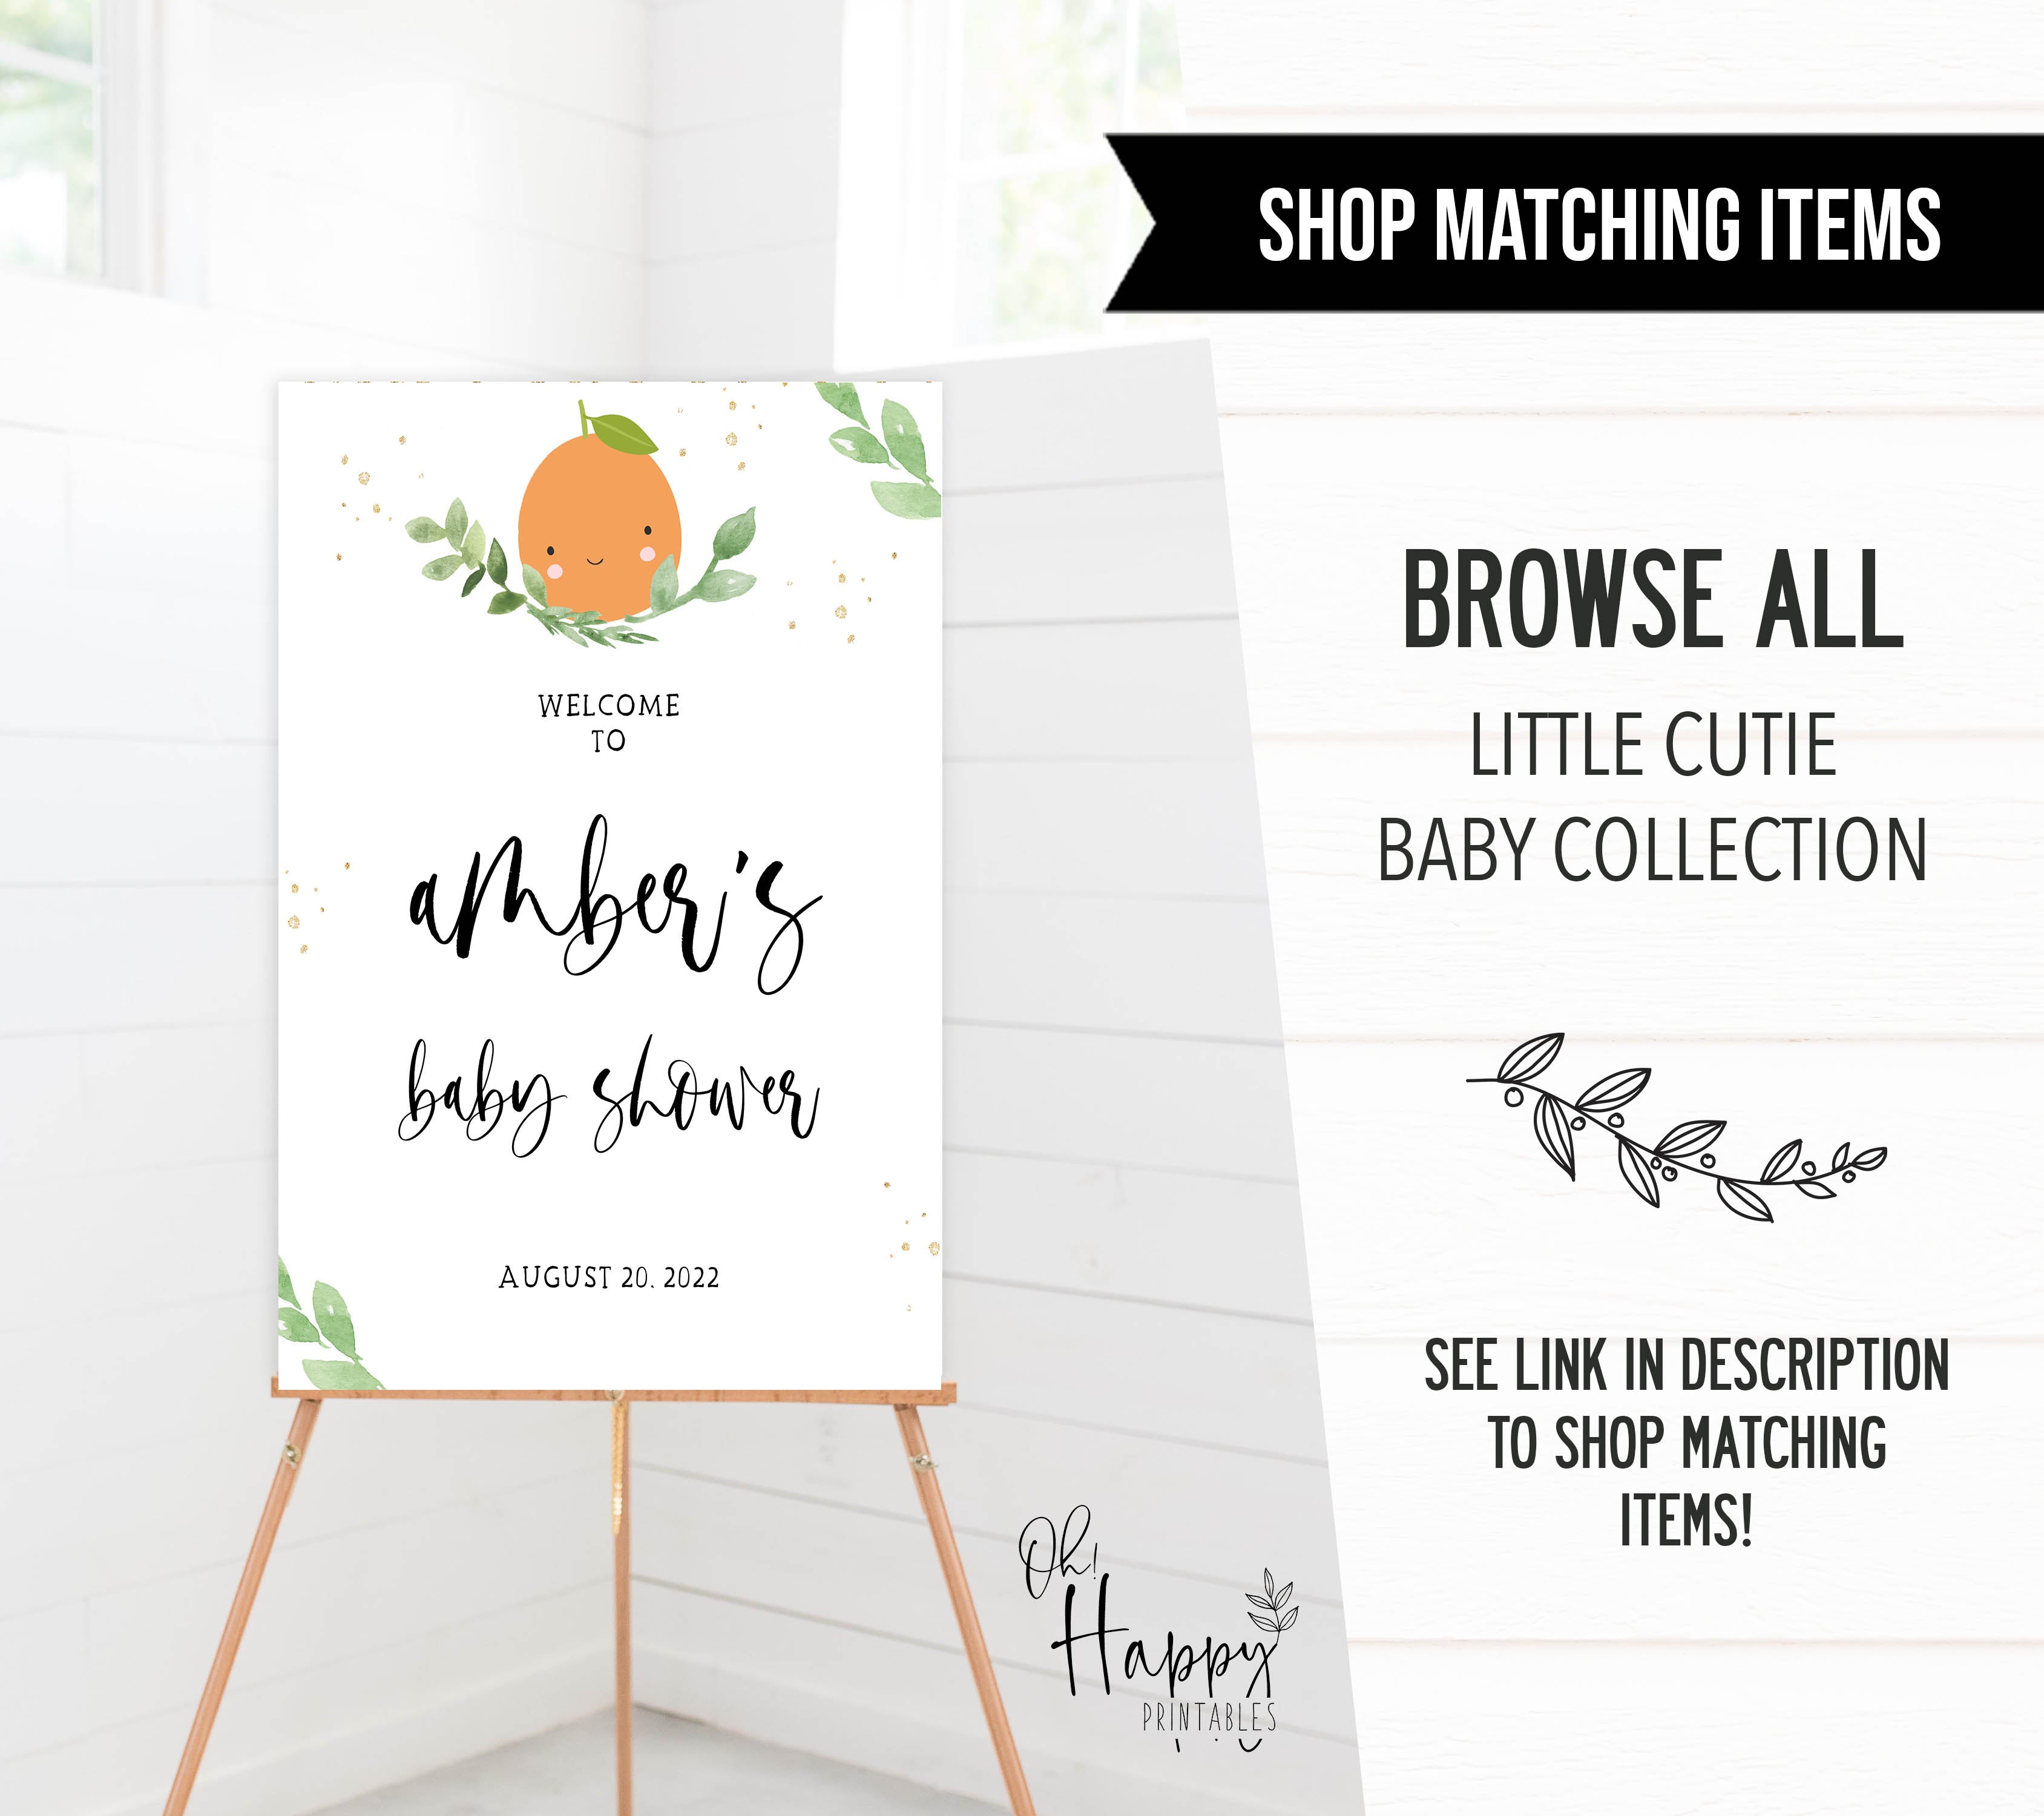 baby memory game, Printable baby shower games, little cutie baby games, baby shower games, fun baby shower ideas, top baby shower ideas, little cutie baby shower, baby shower games, fun little cutie baby shower ideas